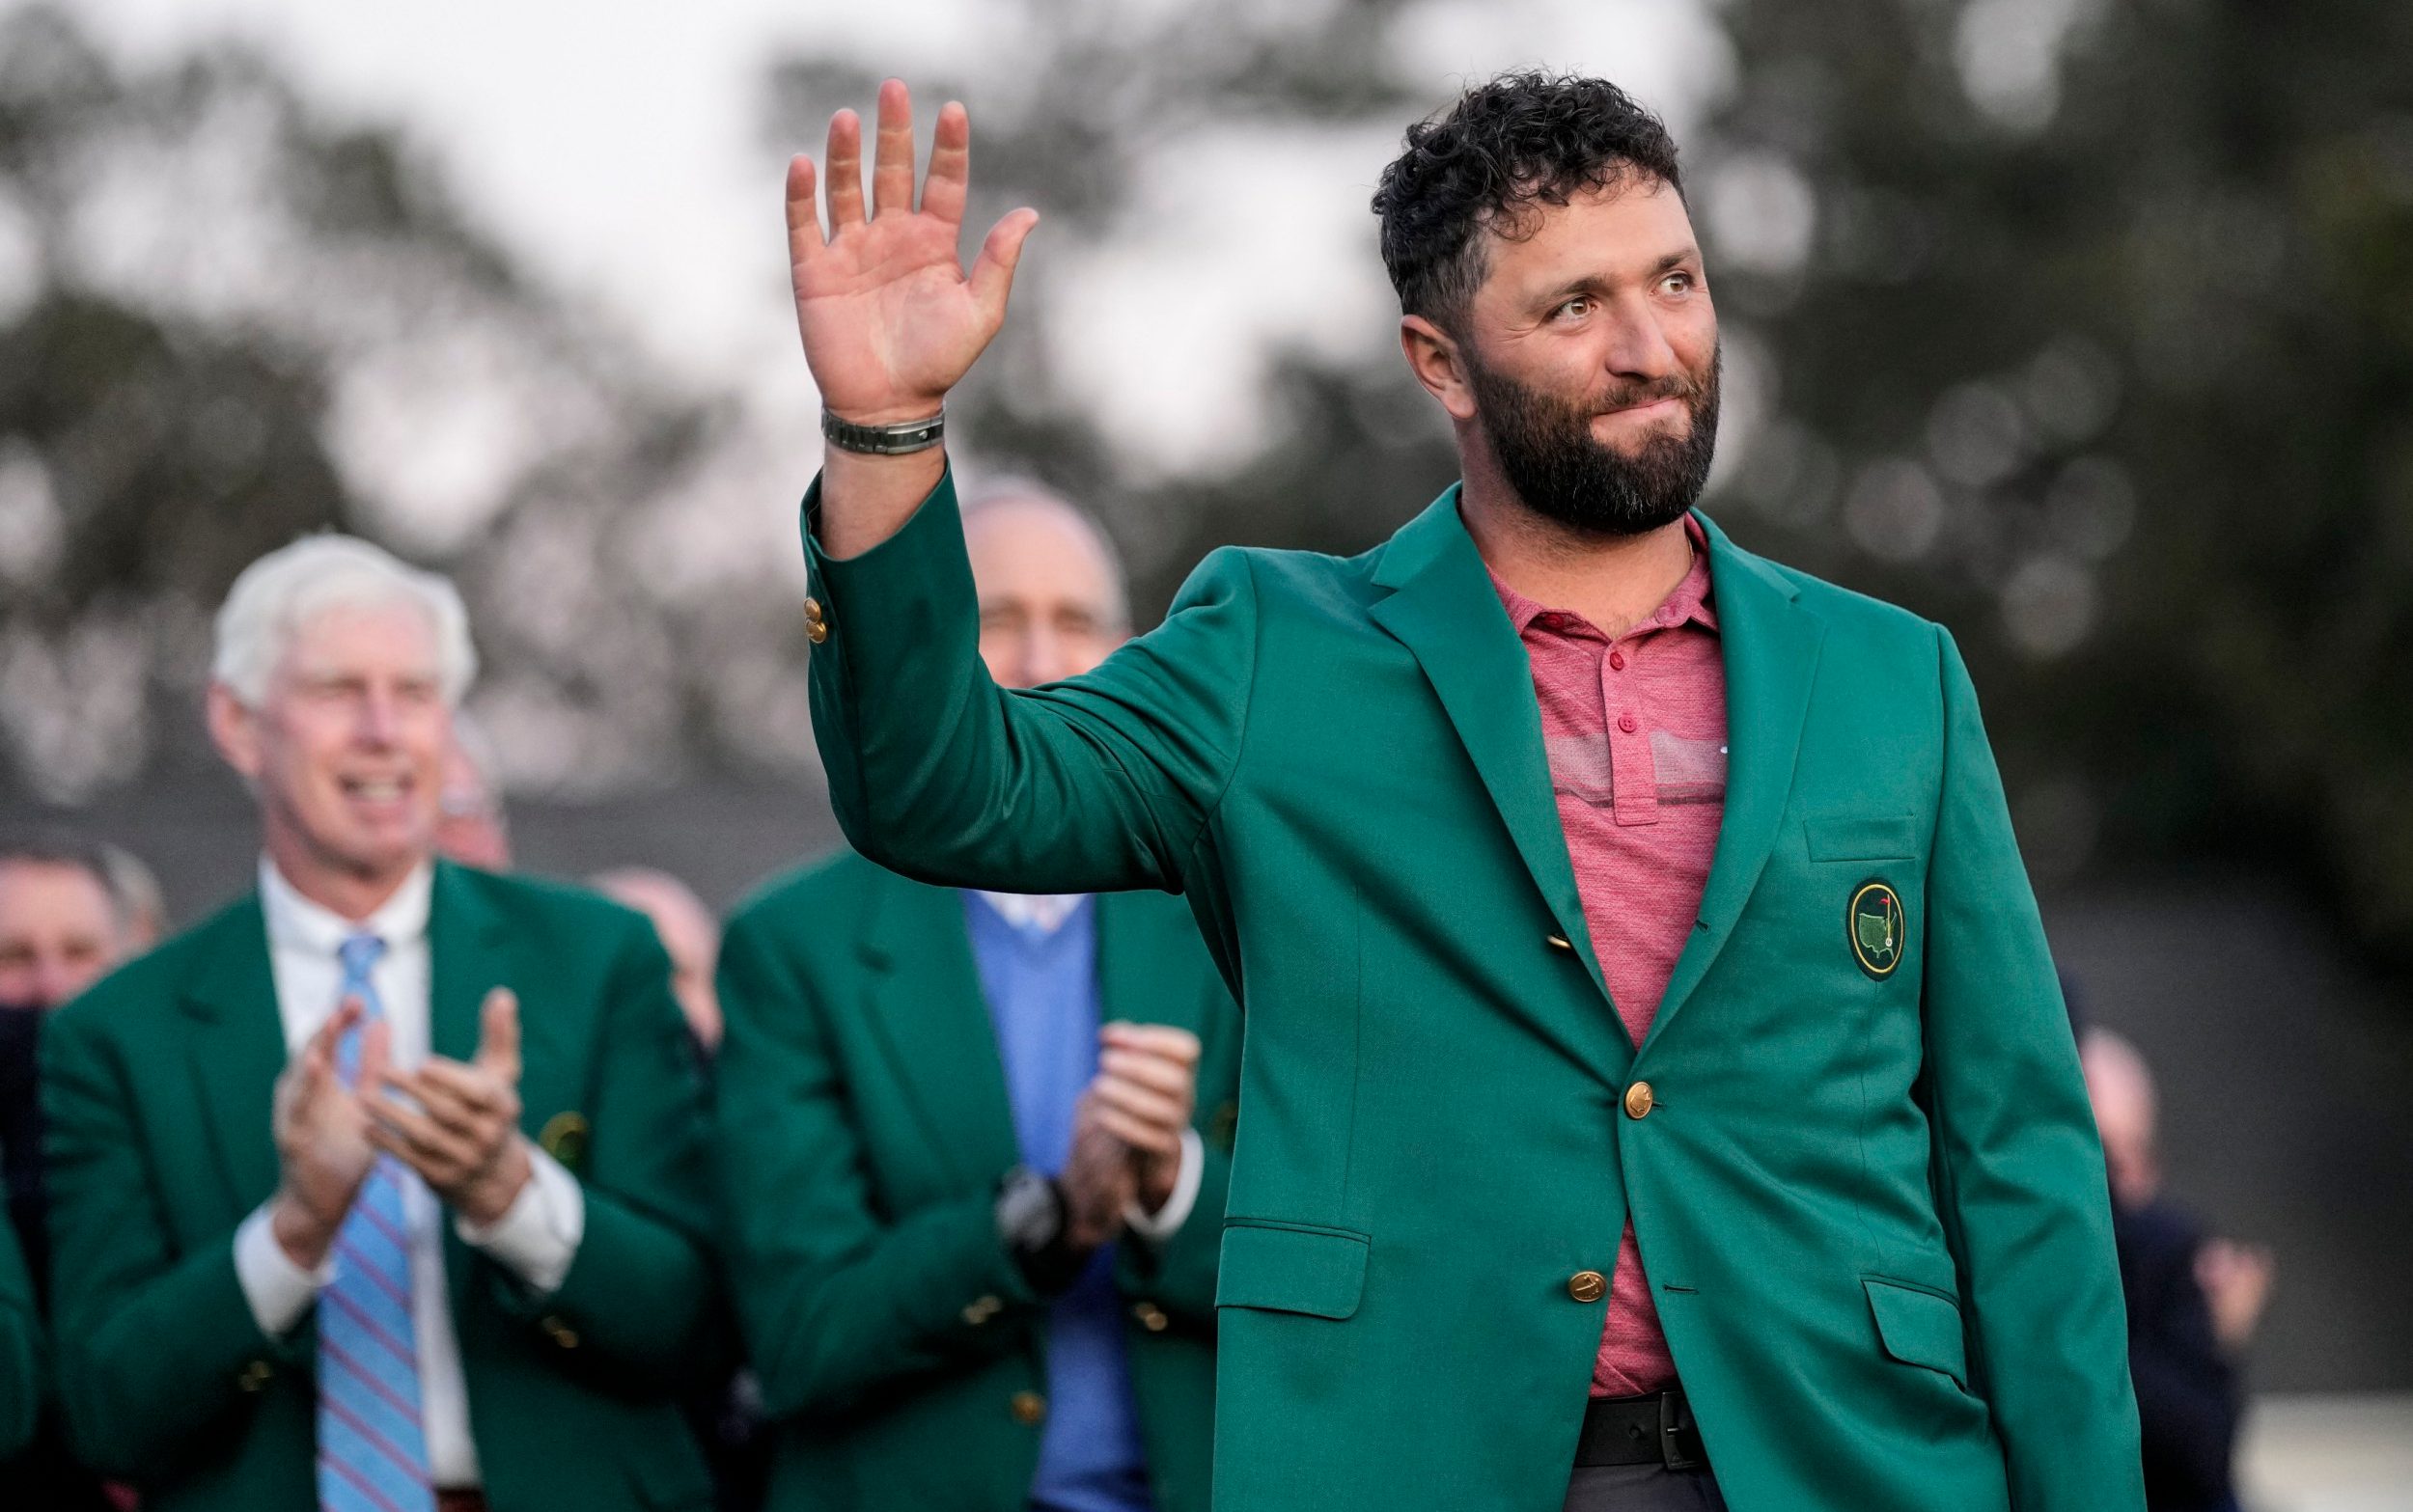 golf is saturated with greed – the masters cannot afford viewers switching off